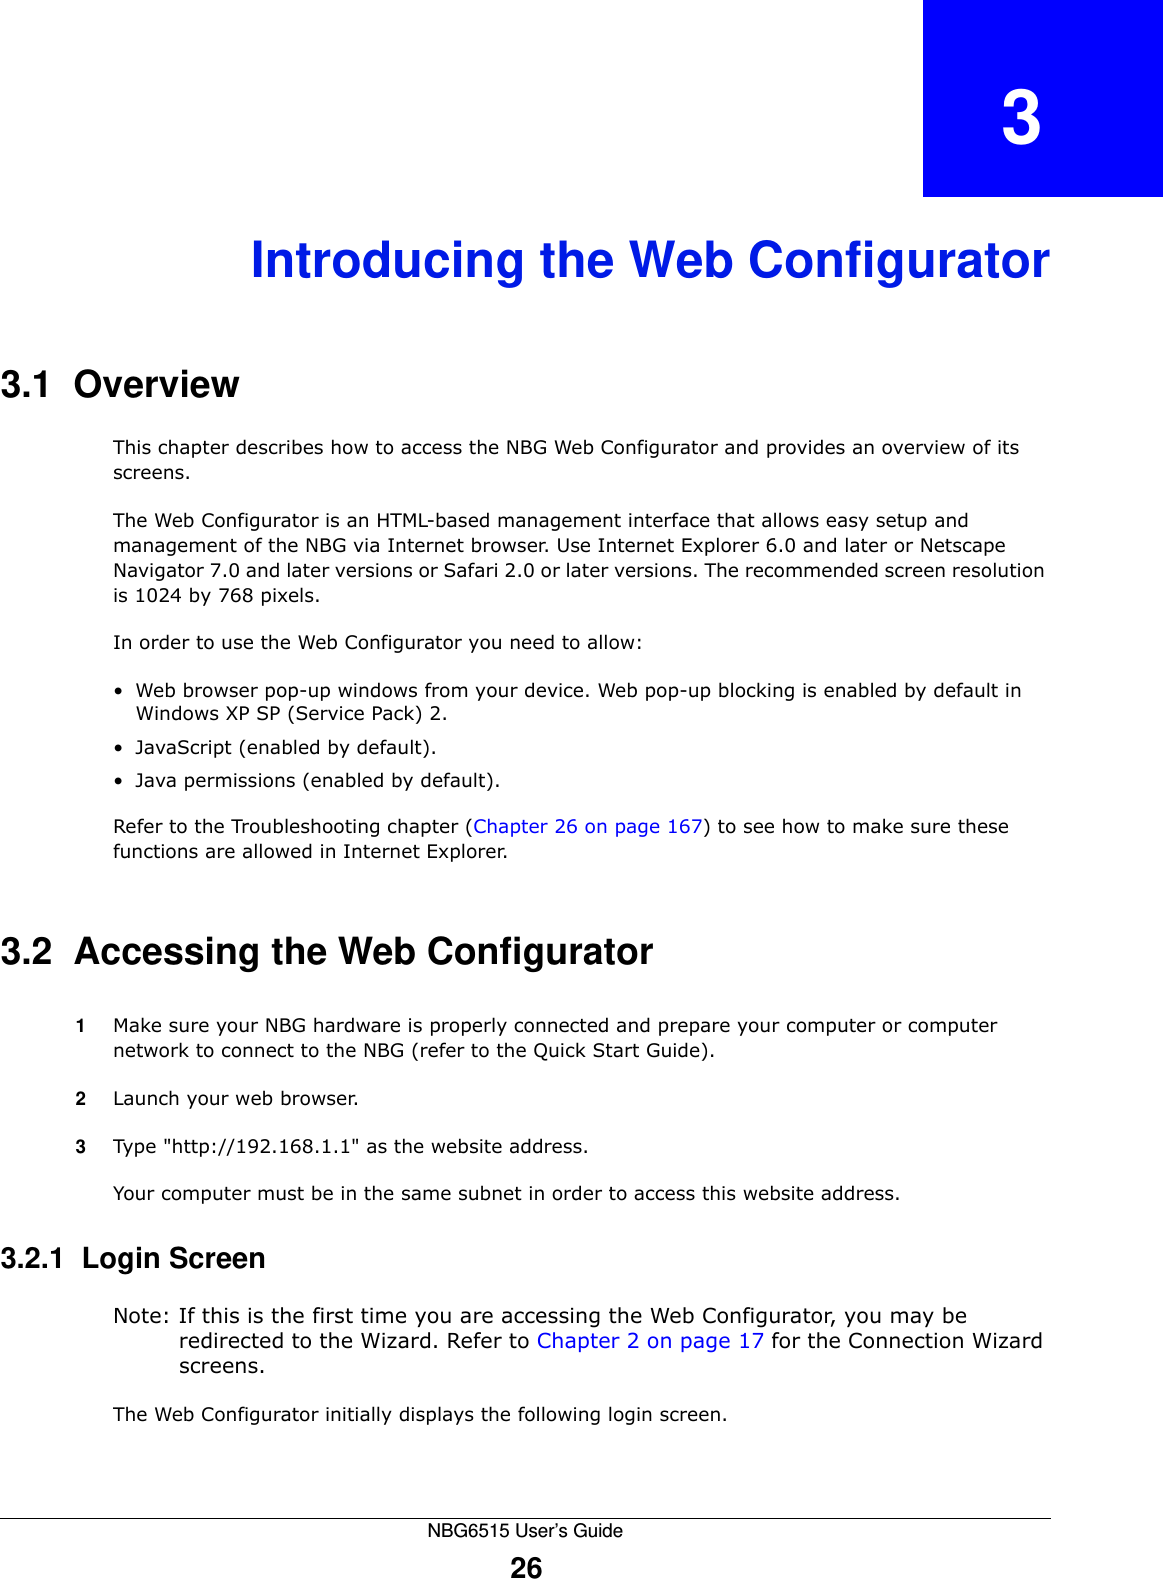 NBG6515 User’s Guide26CHAPTER   3Introducing the Web Configurator3.1  OverviewThis chapter describes how to access the NBG Web Configurator and provides an overview of its screens.The Web Configurator is an HTML-based management interface that allows easy setup and management of the NBG via Internet browser. Use Internet Explorer 6.0 and later or Netscape Navigator 7.0 and later versions or Safari 2.0 or later versions. The recommended screen resolution is 1024 by 768 pixels.In order to use the Web Configurator you need to allow:• Web browser pop-up windows from your device. Web pop-up blocking is enabled by default in Windows XP SP (Service Pack) 2.• JavaScript (enabled by default).• Java permissions (enabled by default).Refer to the Troubleshooting chapter (Chapter 26 on page 167) to see how to make sure these functions are allowed in Internet Explorer.3.2  Accessing the Web Configurator1Make sure your NBG hardware is properly connected and prepare your computer or computer network to connect to the NBG (refer to the Quick Start Guide).2Launch your web browser.3Type &quot;http://192.168.1.1&quot; as the website address. Your computer must be in the same subnet in order to access this website address.3.2.1  Login ScreenNote: If this is the first time you are accessing the Web Configurator, you may be redirected to the Wizard. Refer to Chapter 2 on page 17 for the Connection Wizard screens. The Web Configurator initially displays the following login screen.